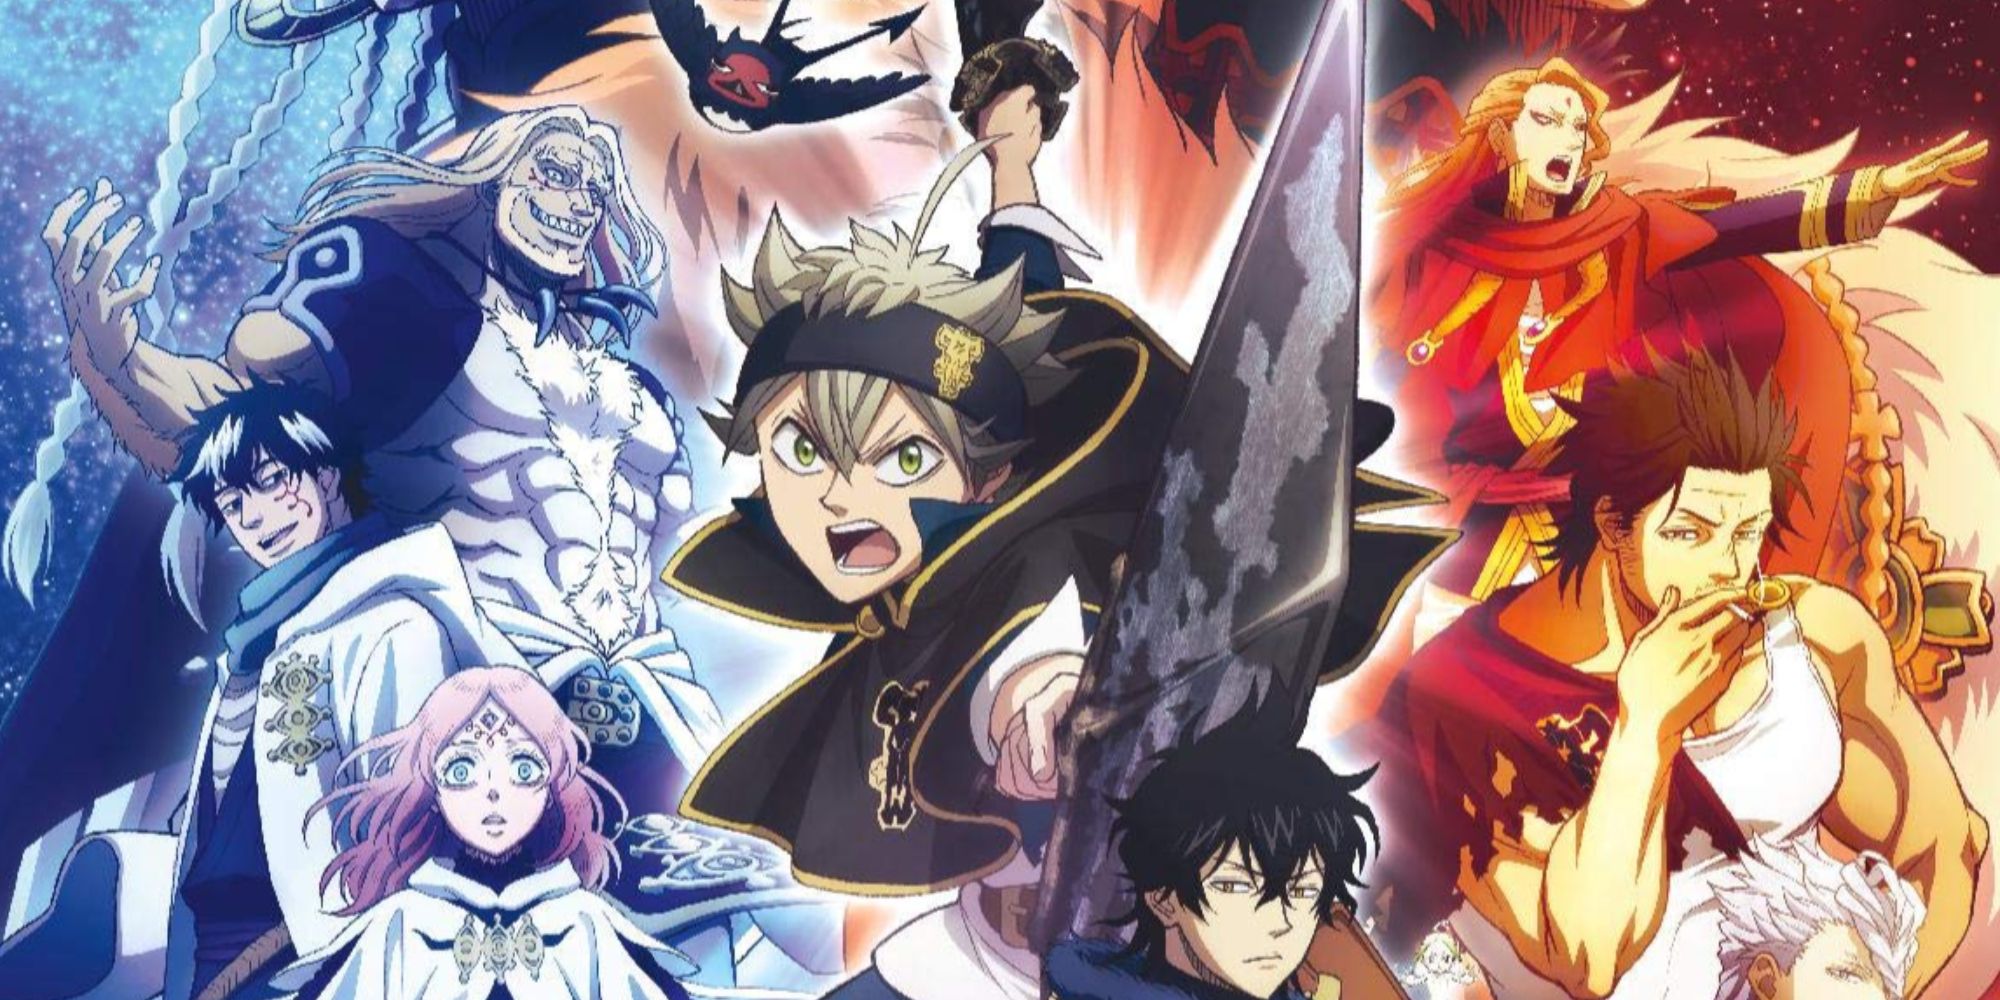 Several characters from Black Clover strike action poses, with the protagonist pointing a sword at the viewer.